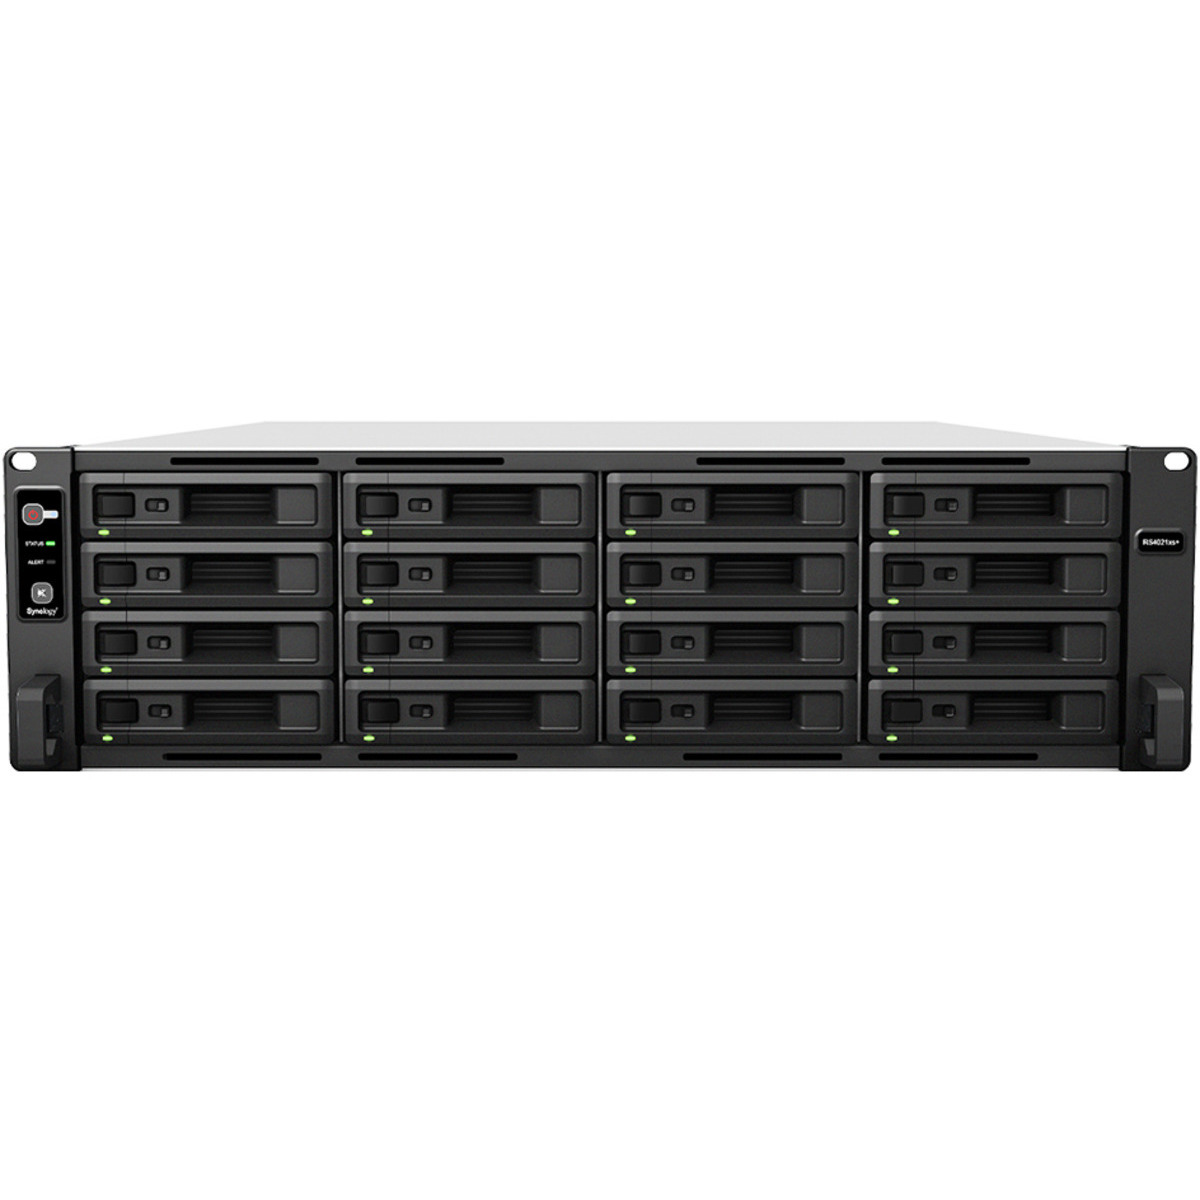 Synology RackStation RS4021xs+ 96tb 16-Bay RackMount Large Business / Enterprise NAS - Network Attached Storage Device 16x6tb Western Digital Red Pro WD6003FFBX 3.5 7200rpm SATA 6Gb/s HDD NAS Class Drives Installed - Burn-In Tested RackStation RS4021xs+